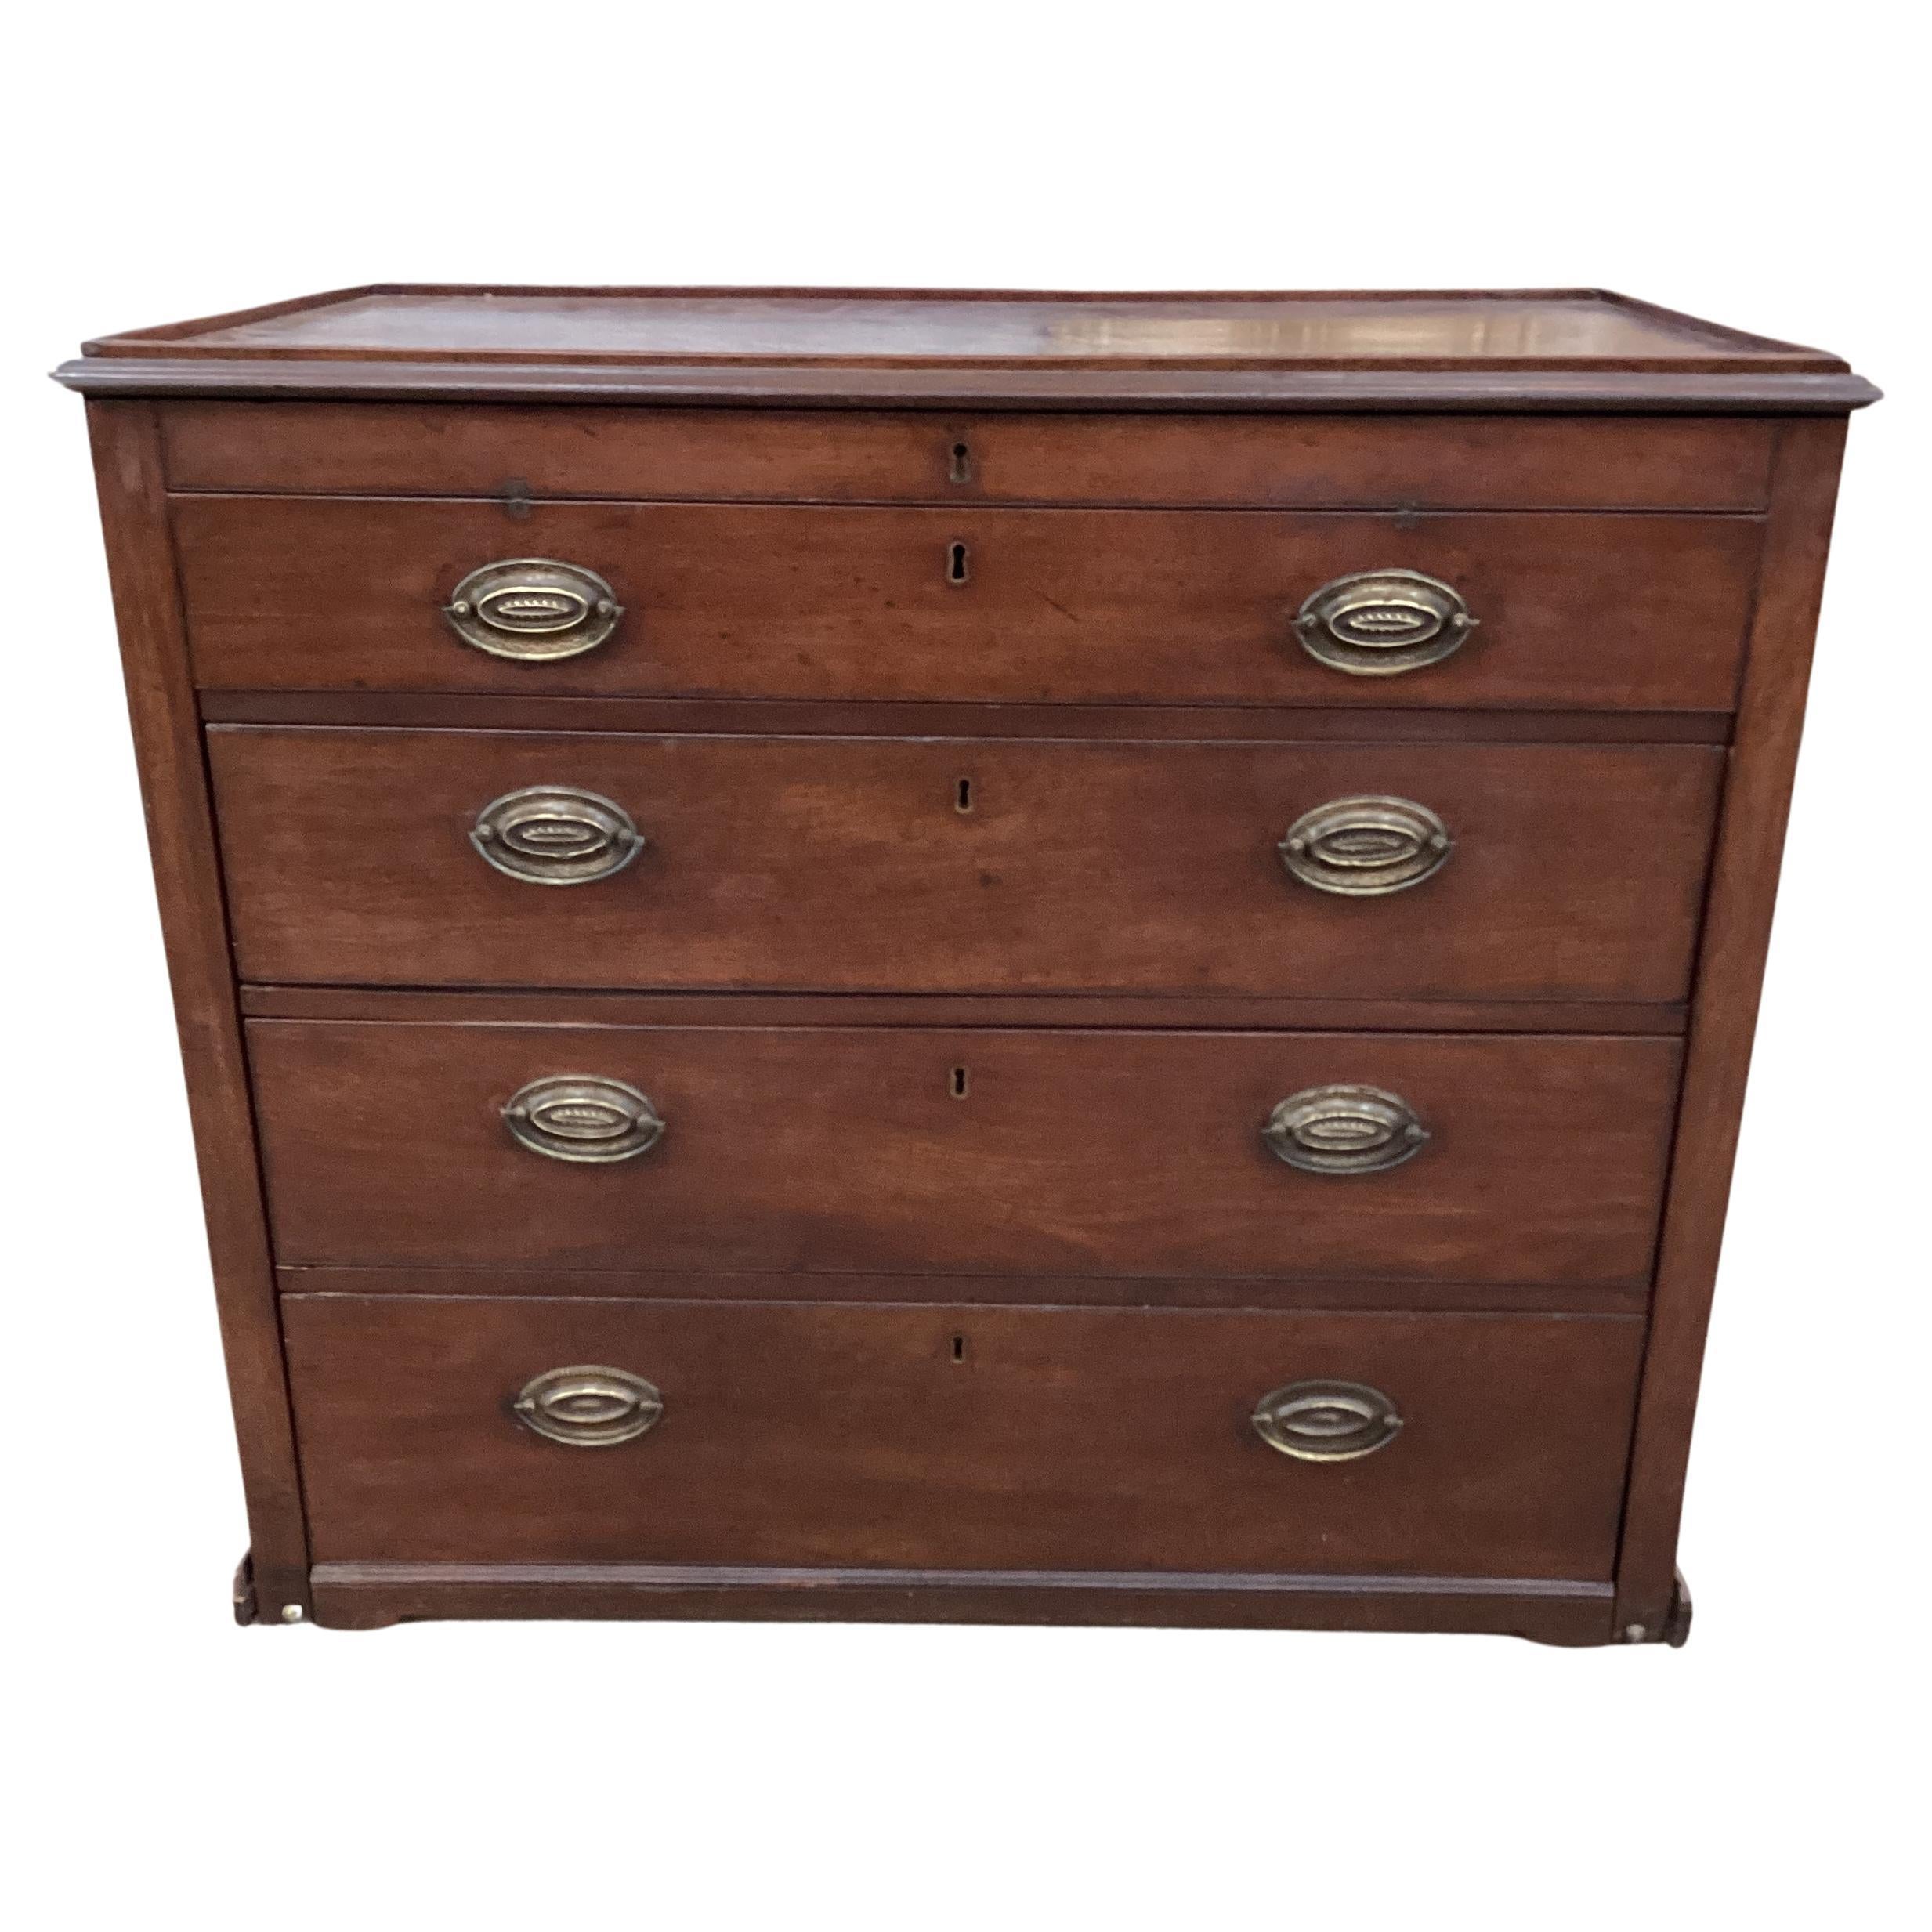 A rare English Georgian Mahogany Metamorphic Chest with a slide out drawer that reveals a drafting slope. Chest has the original cast iron handles.. The chest is constructed from beautiful single board Cuban mahogany and retains a lovely aged